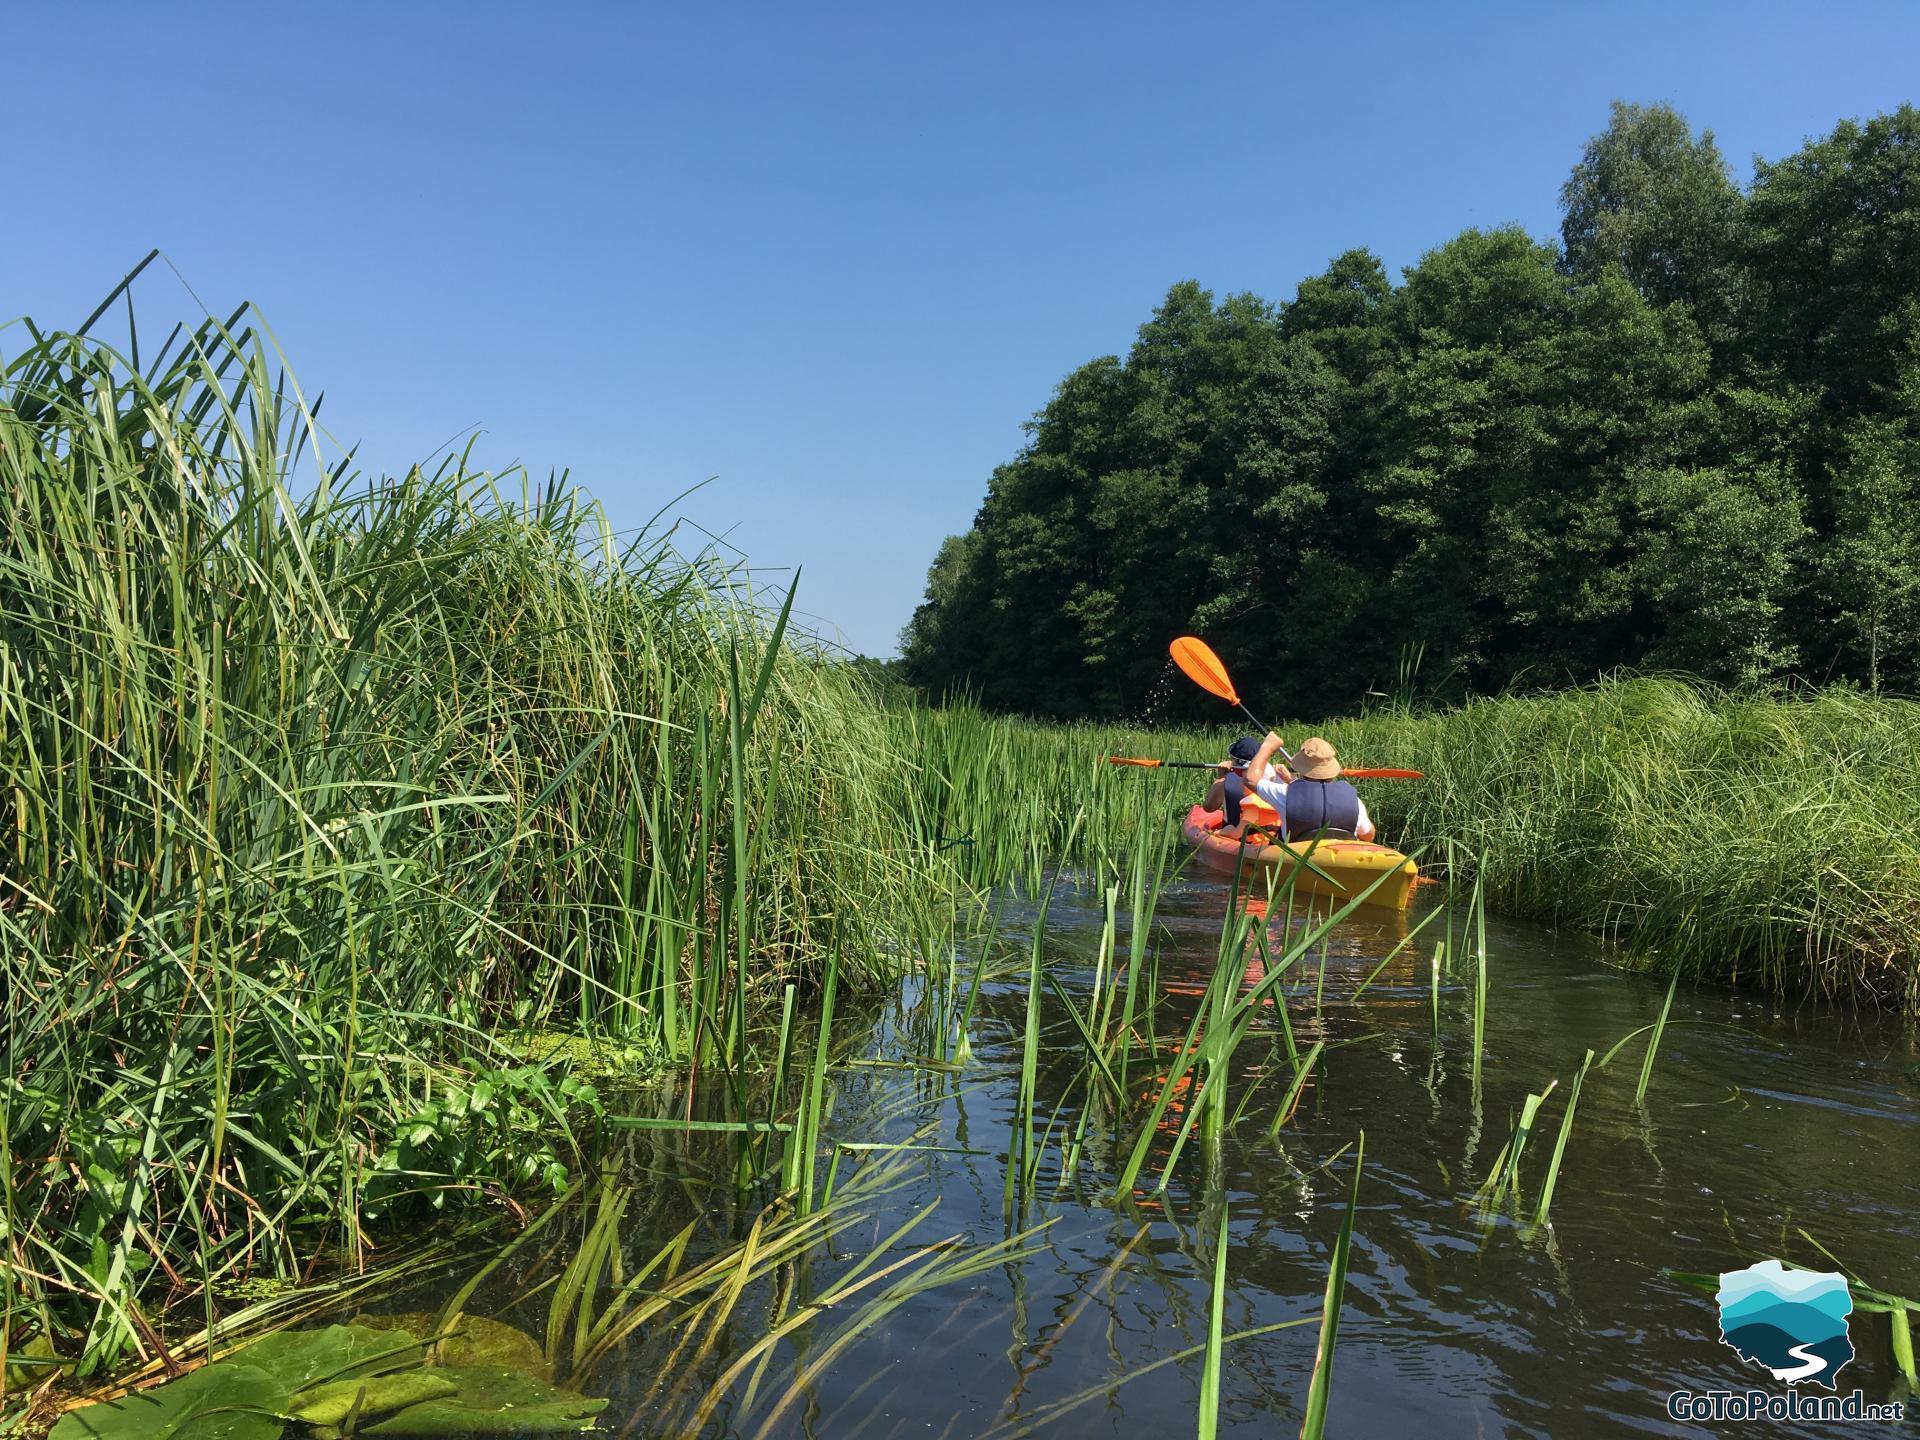 A few people are kayaking, reeds grow along the river, the sky is cloudless